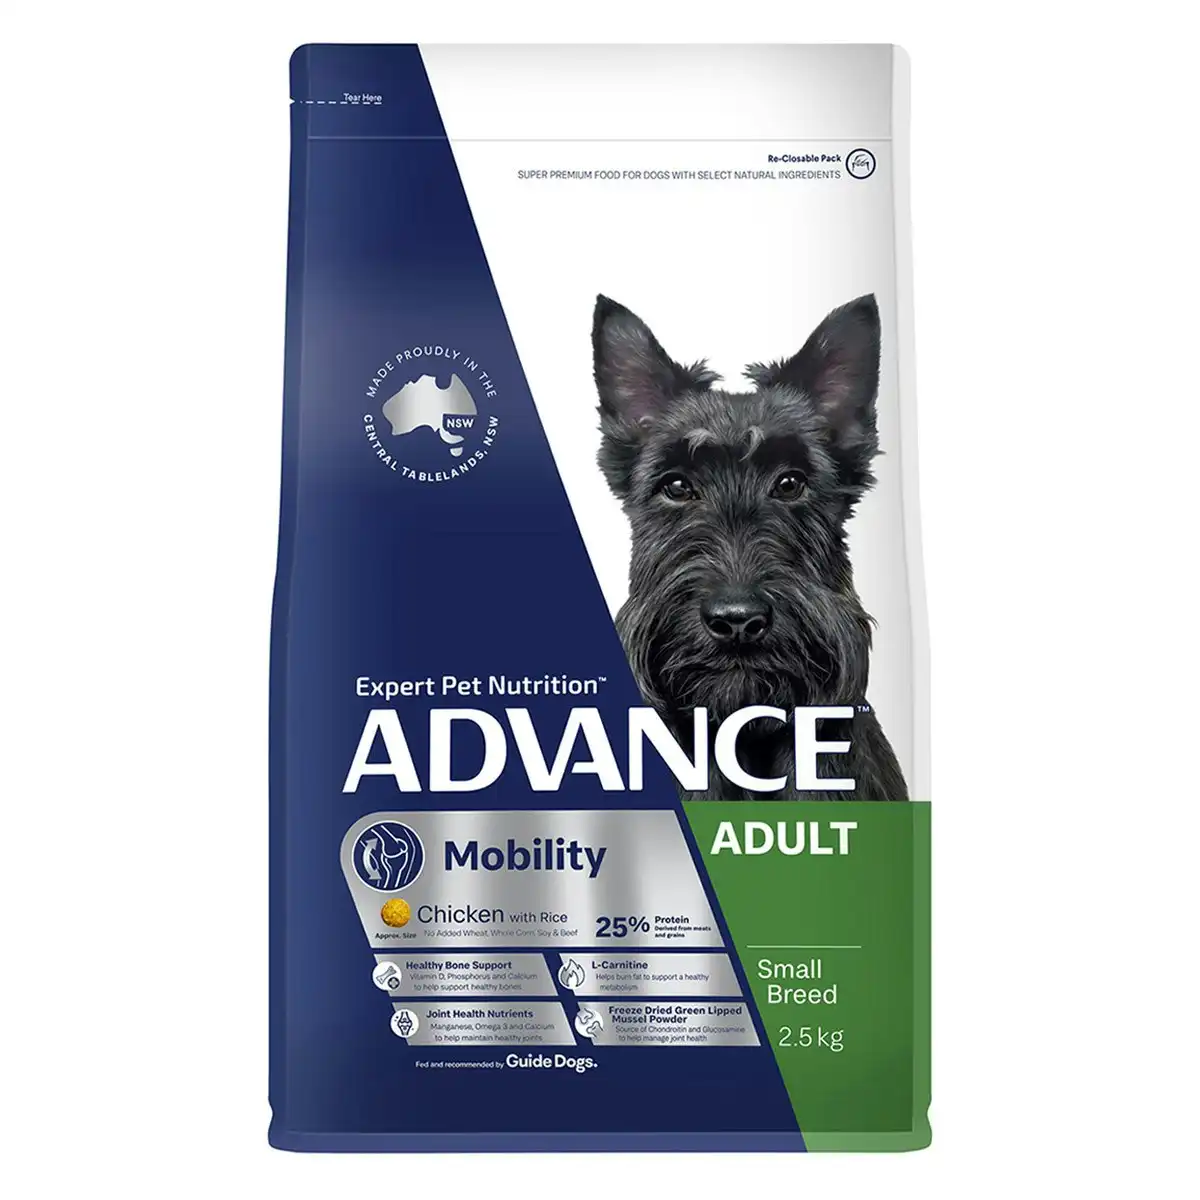 ADVANCE Mobility Adult Small Breed Chicken with Rice Dry Dog Food 2.5 Kg